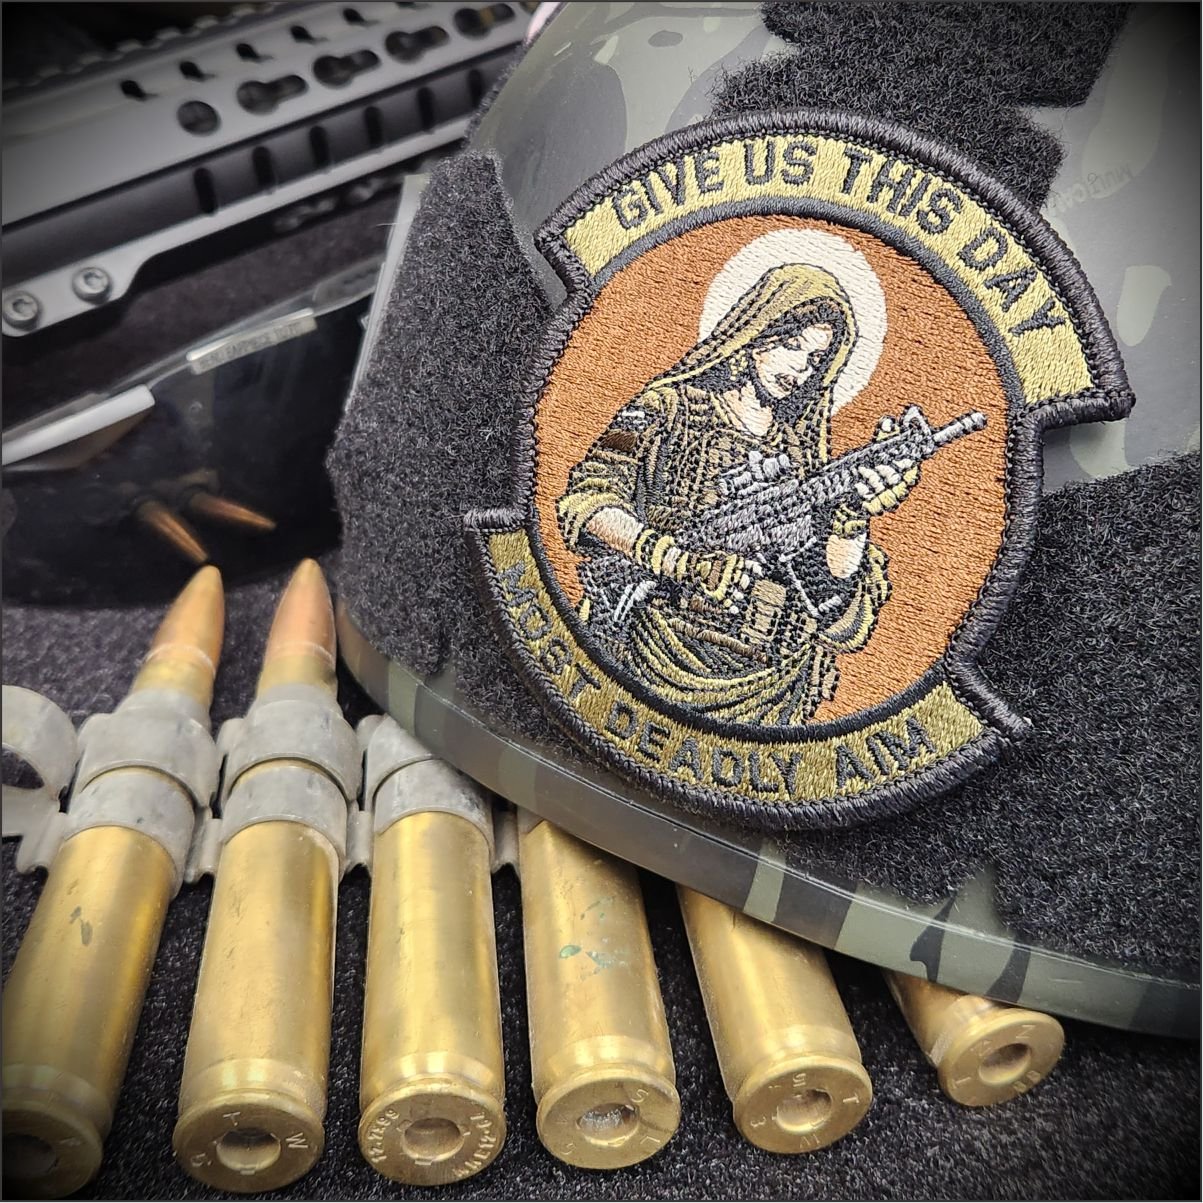 May 2024 POTM - 'Mother Mary' - OCP Tactical Angel "Give Us This Day - Most Deadly Aim" 4" Patch